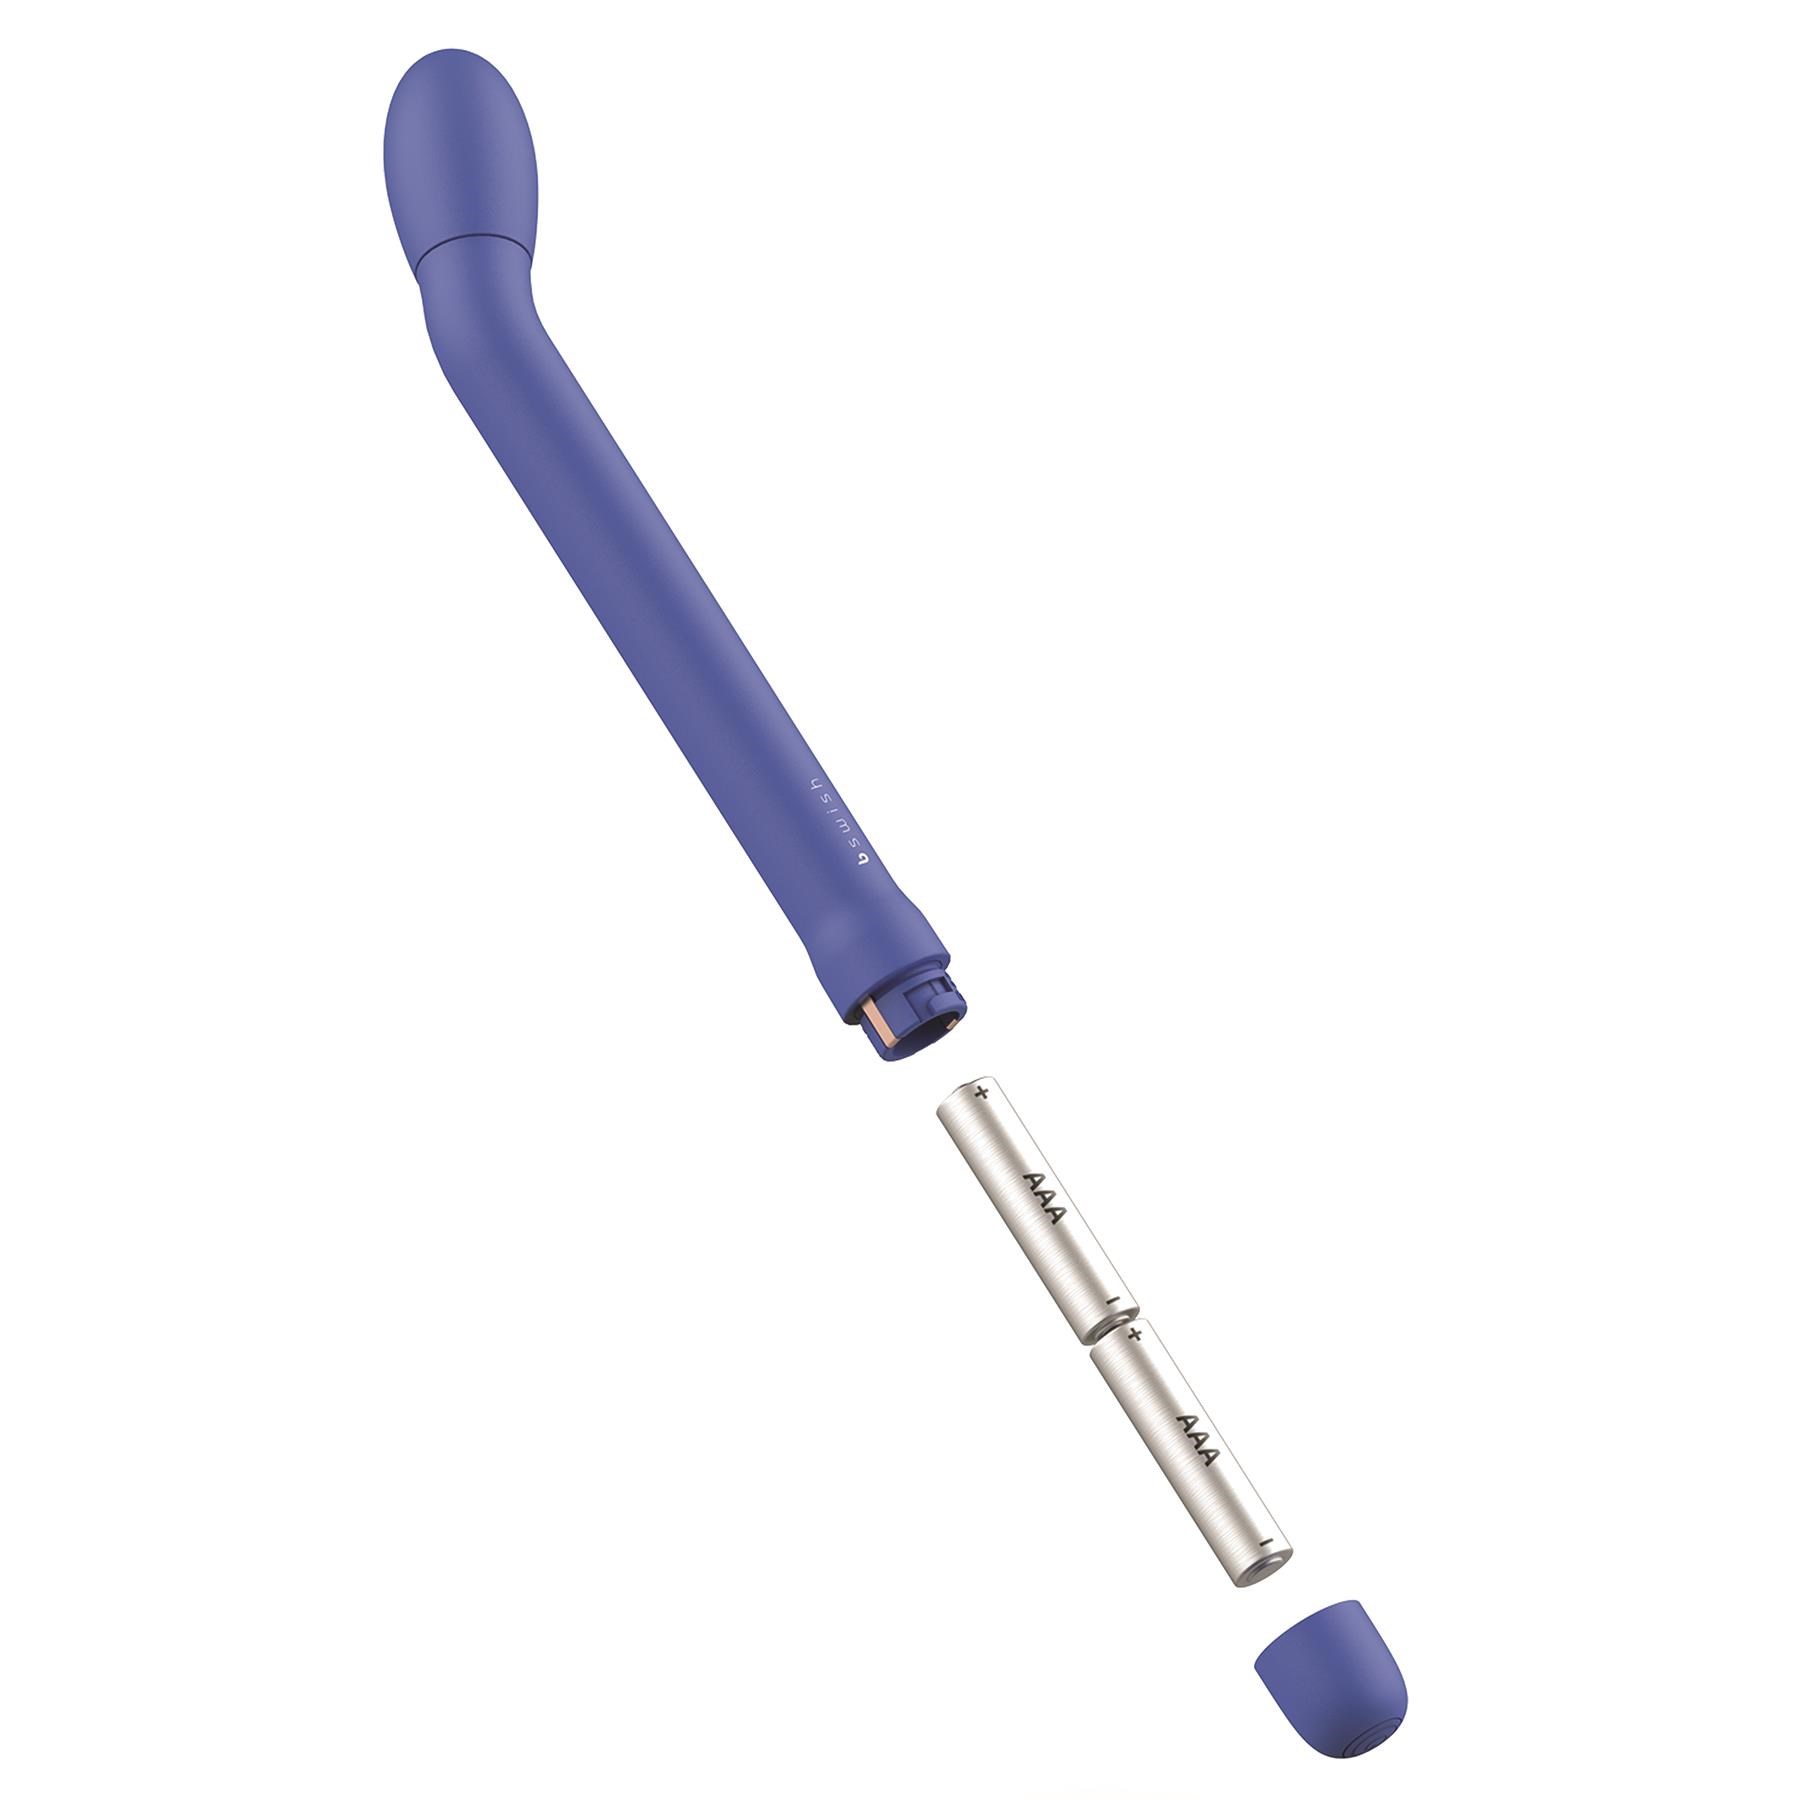 BSwish BGee Classic Slimline G-Spot Massager - Showing Where Batteries are Placed